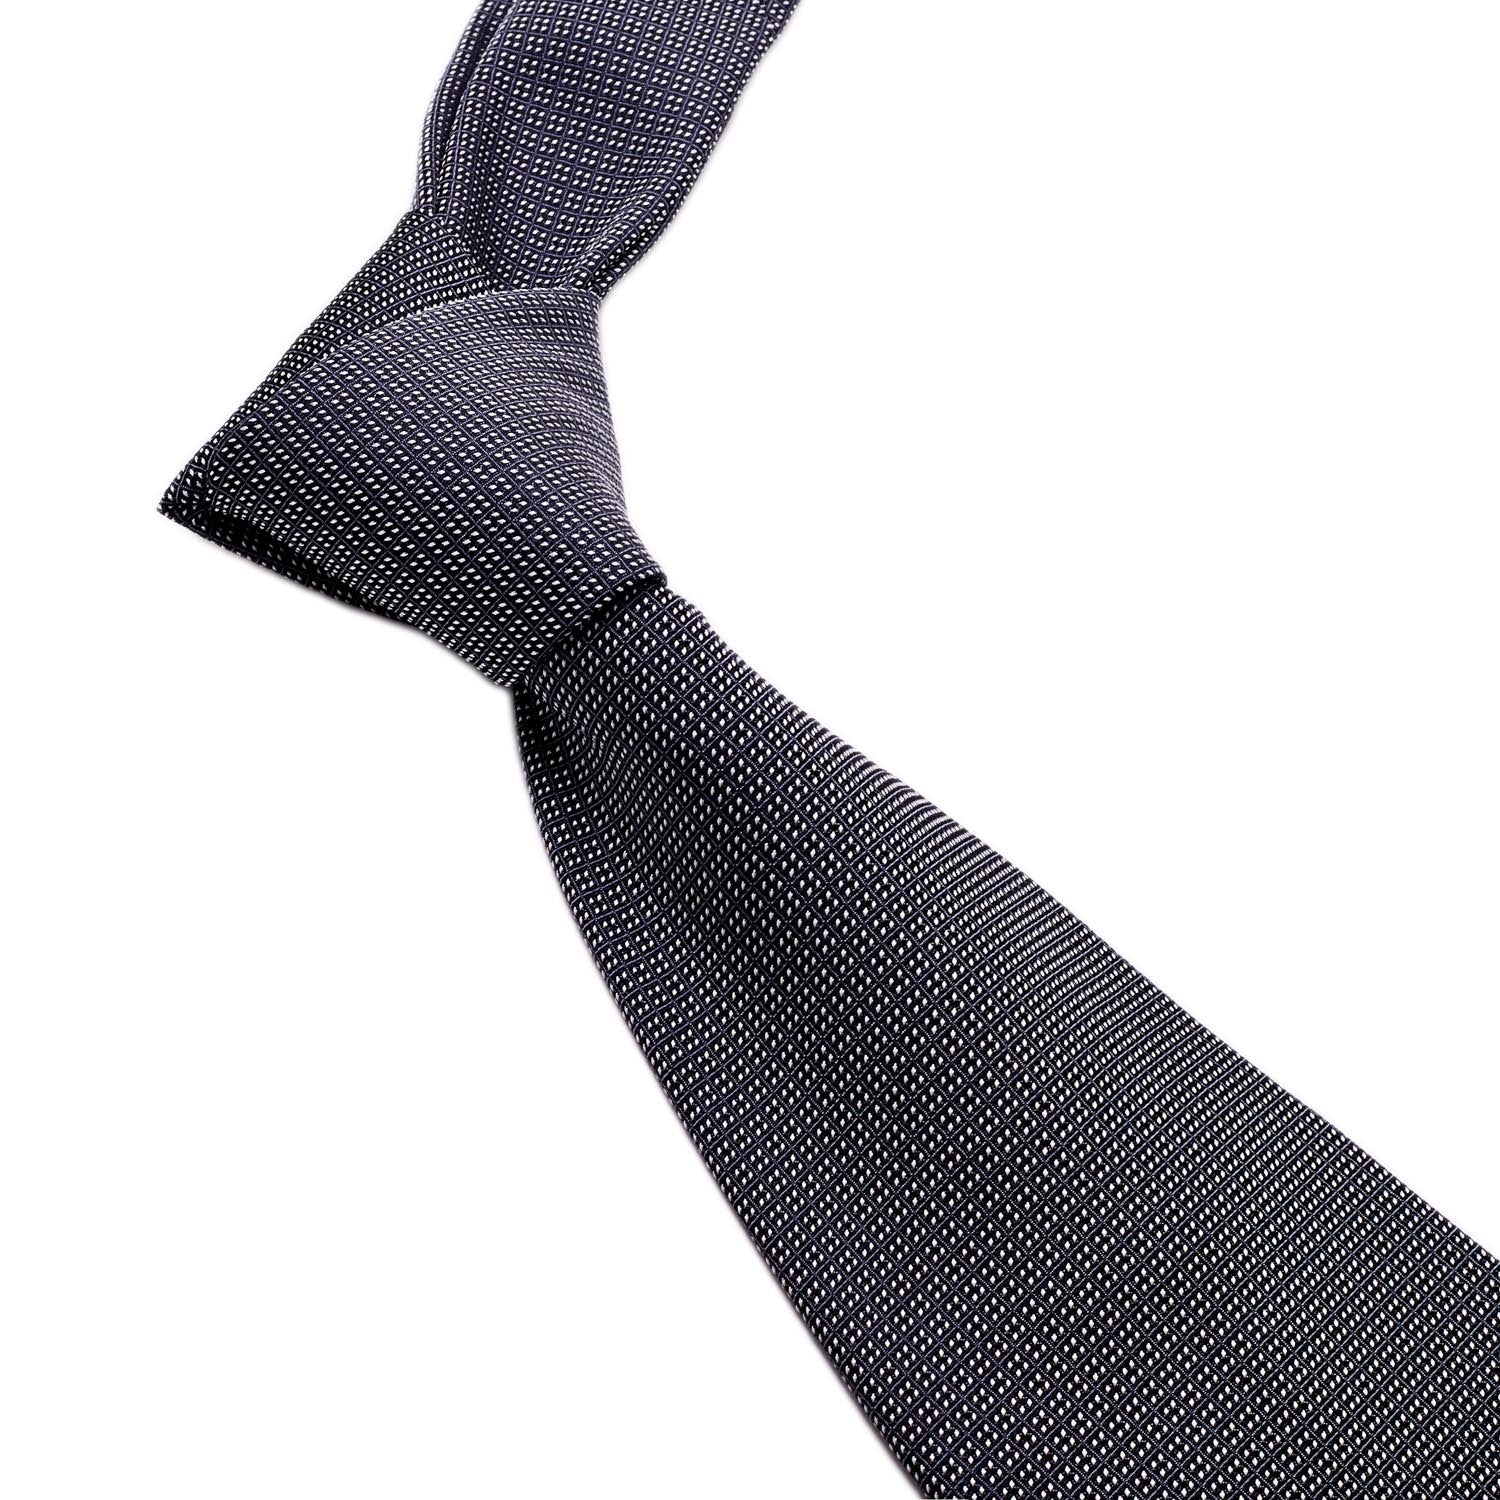 A Sovereign Grade Diamond Point Jacquard Tie on a white background, crafted in the United Kingdom by KirbyAllison.com.